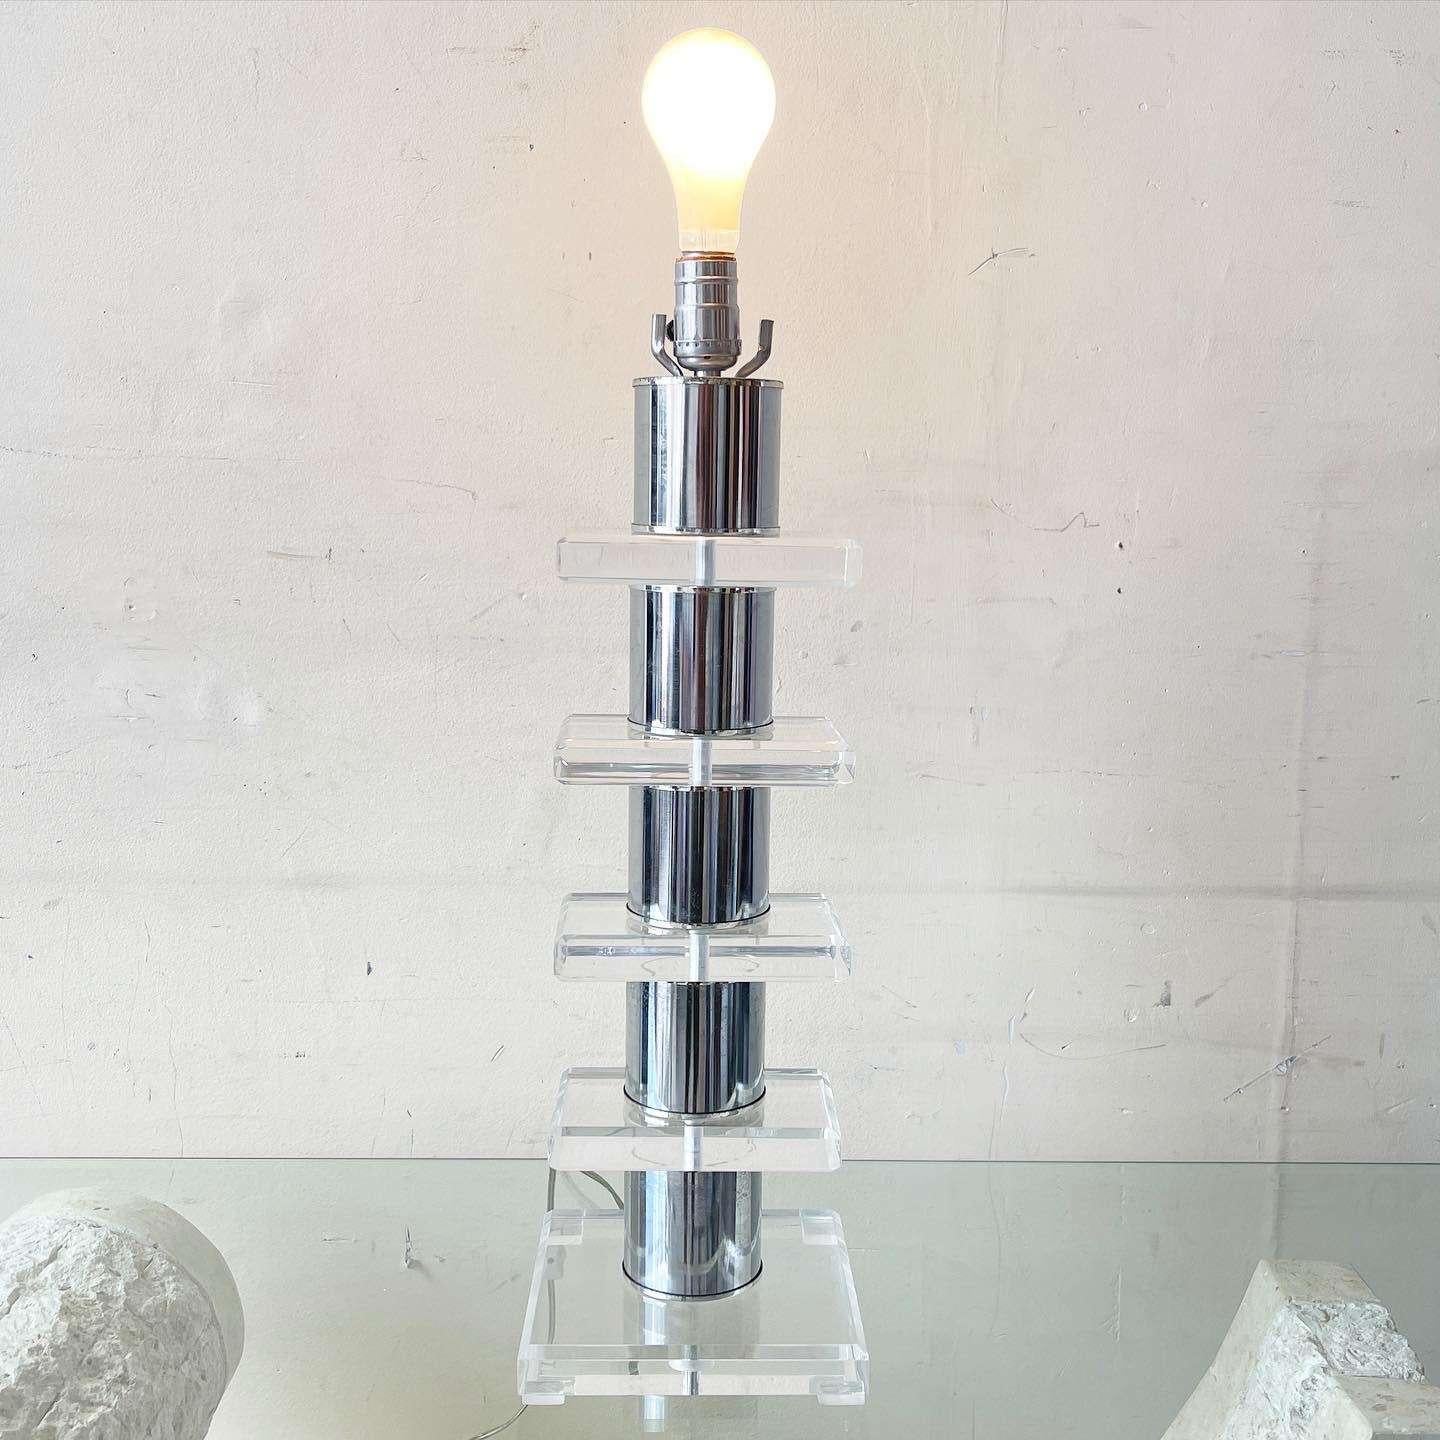 Incredible mid century modern table lamp. Features stacked chrome and lucite rectangles.
